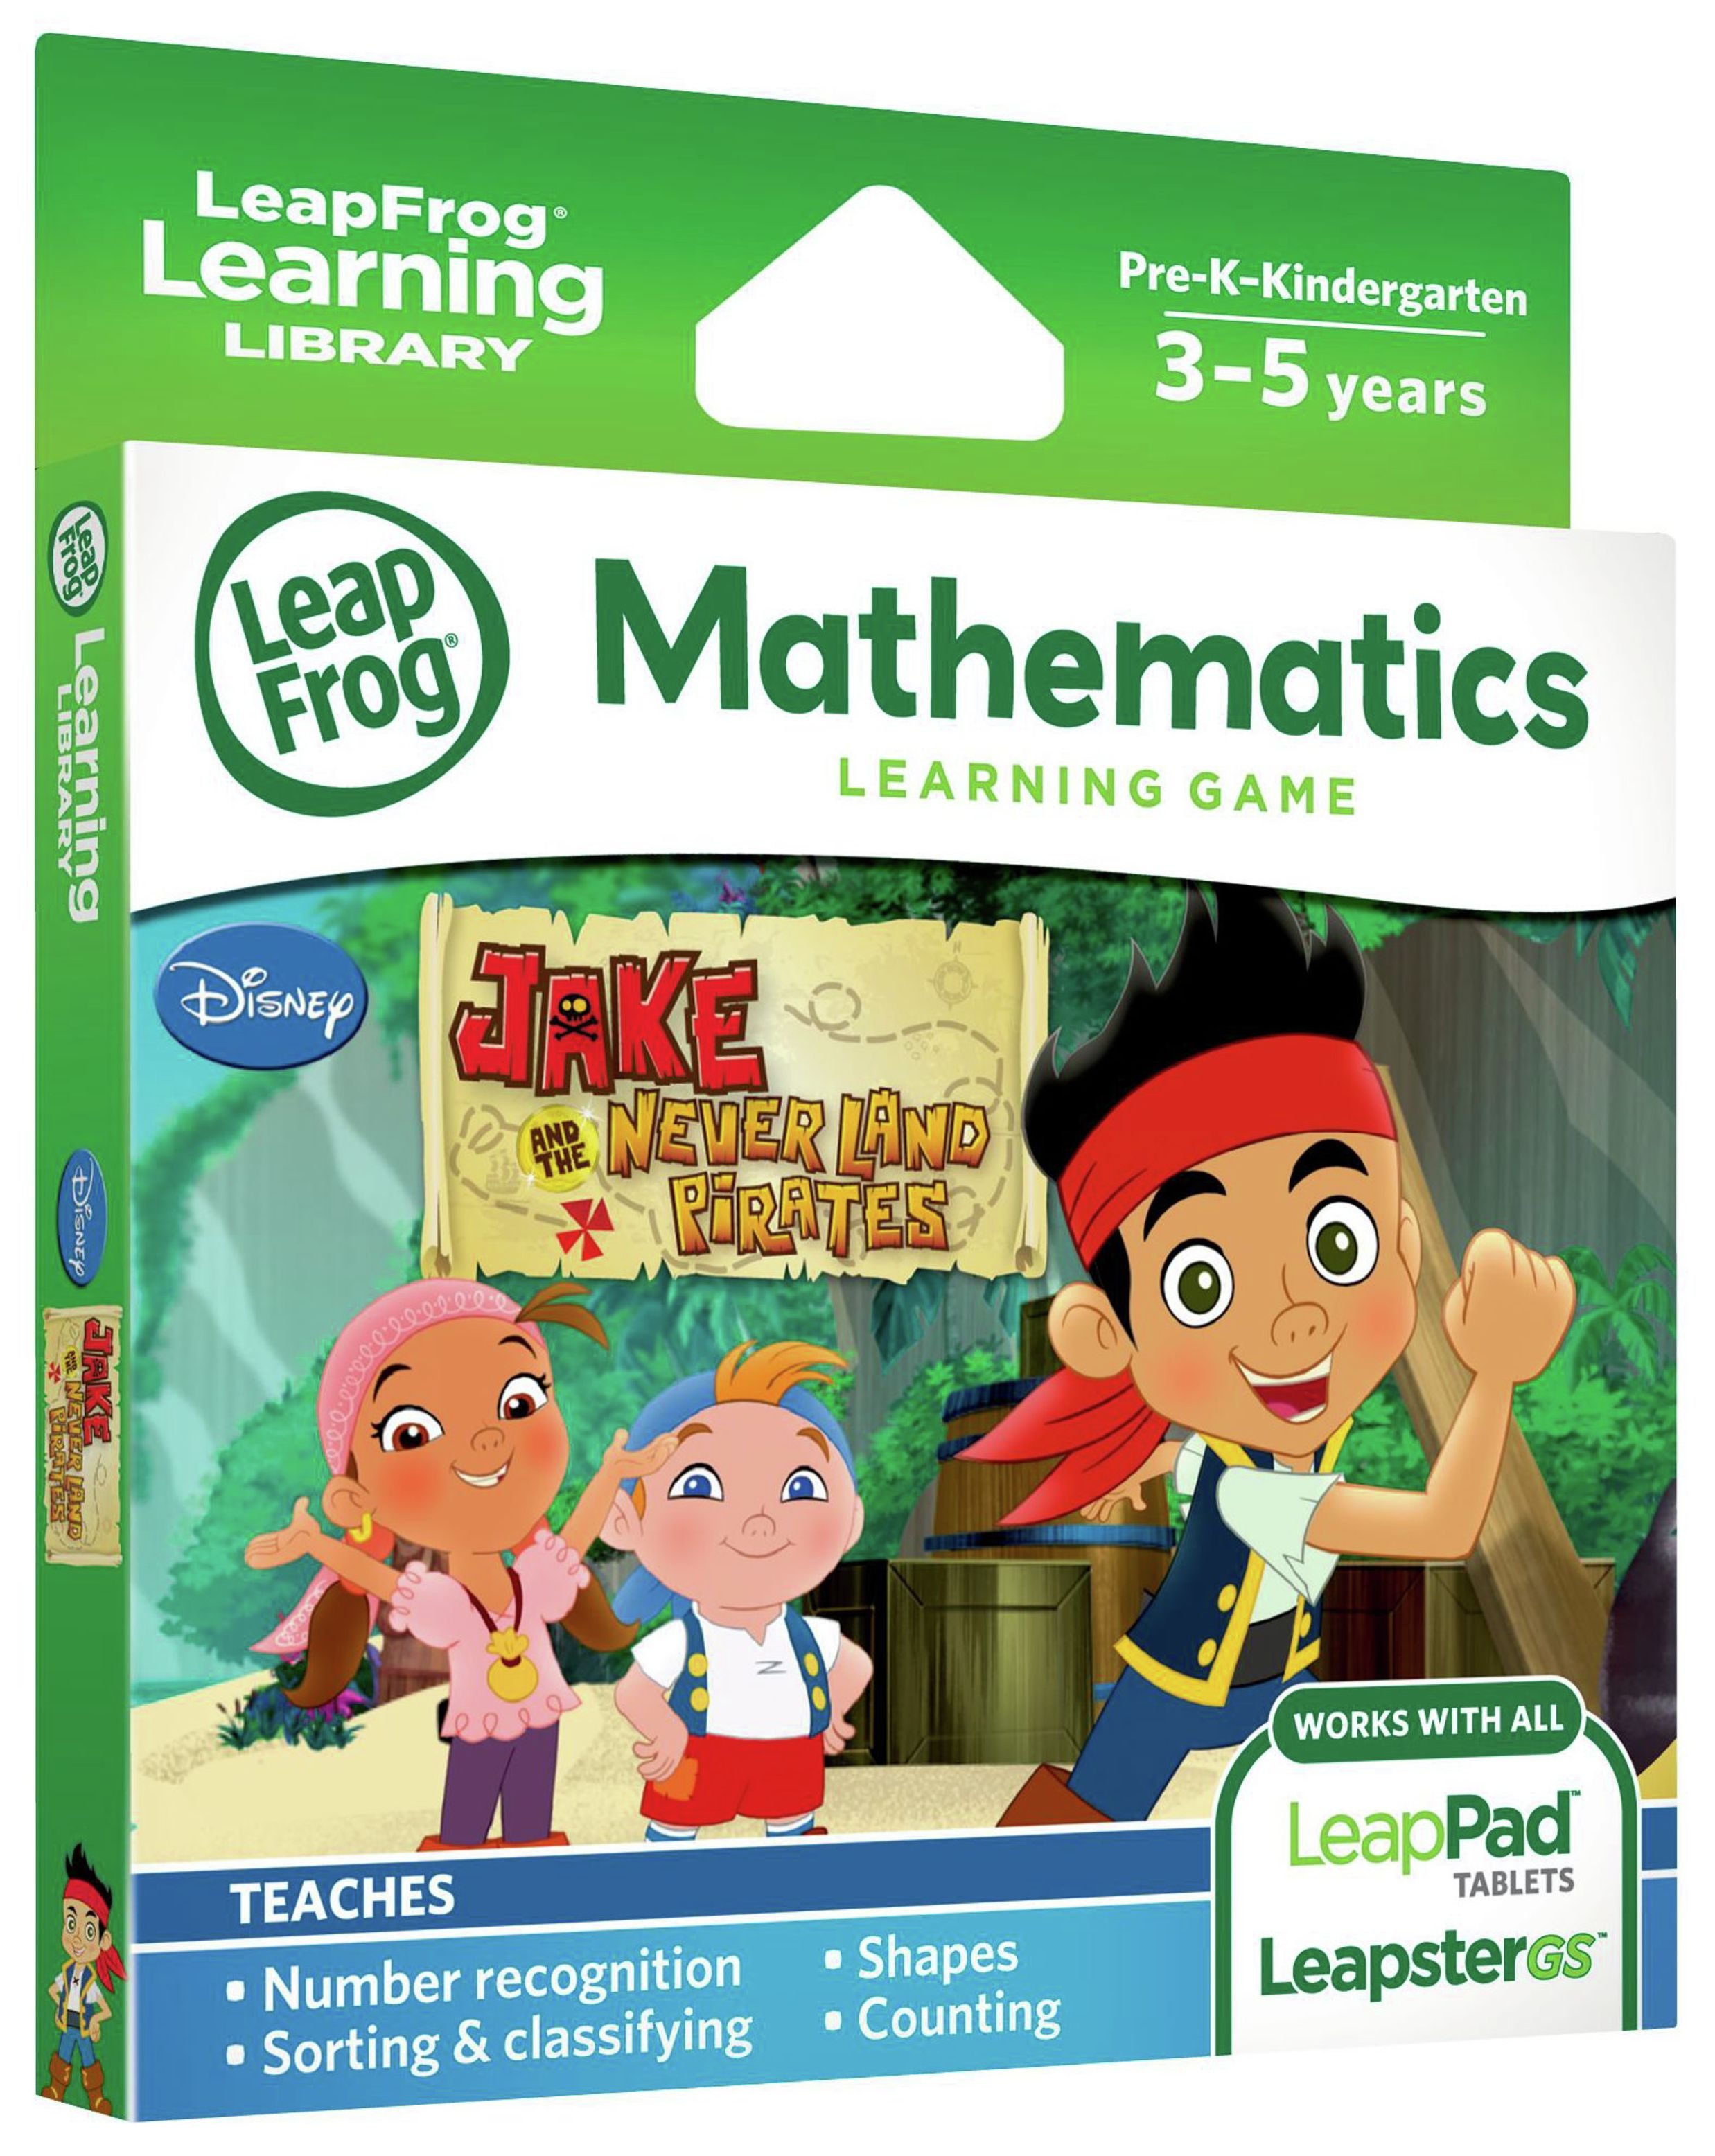 LeapFrog Jake and the Never Land Pirates Learning Game